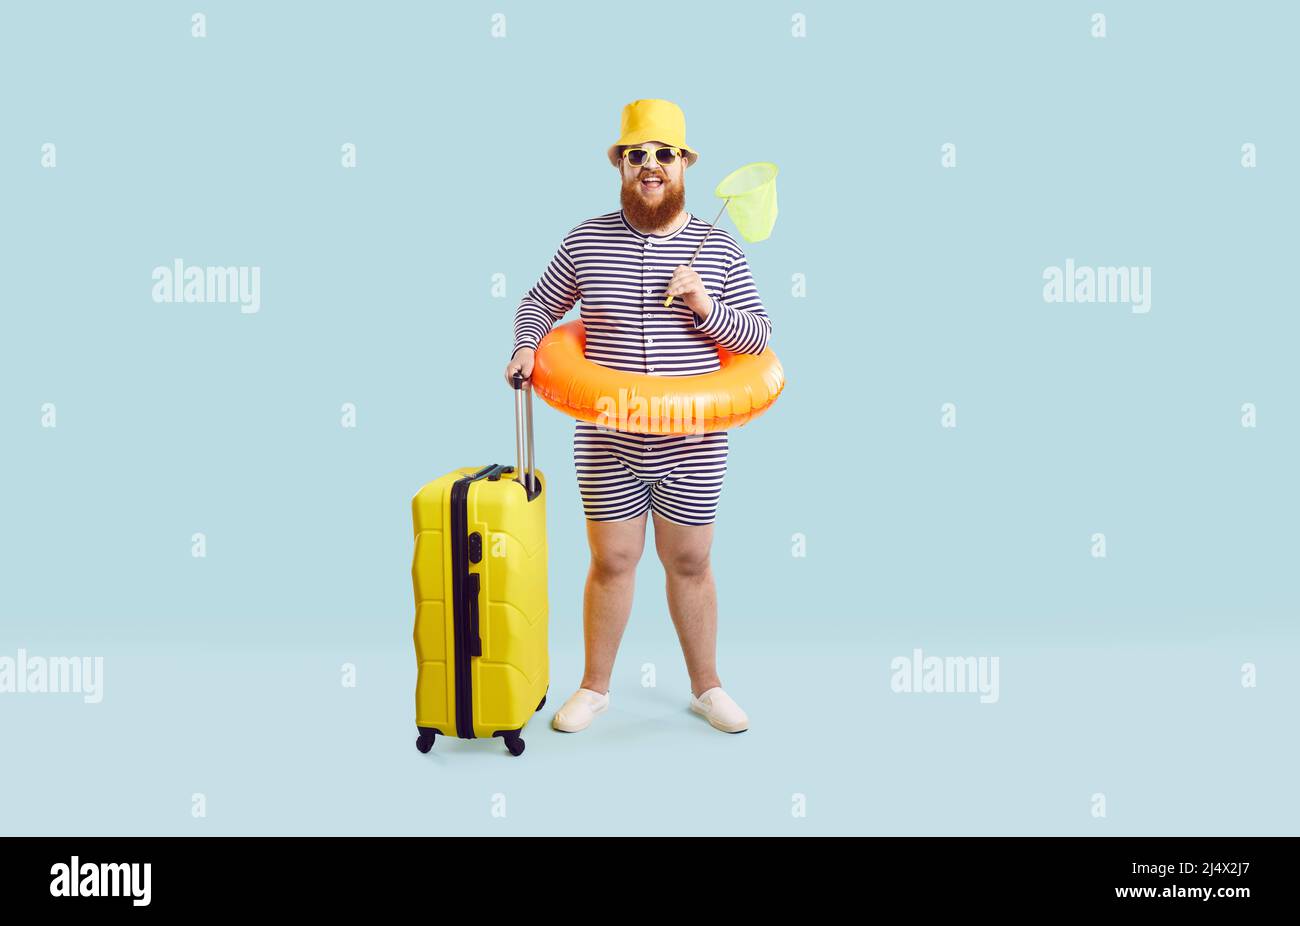 Funny fat man in swimsuit, hat, glasses and inflatable ring standing in studio with his suitcase Stock Photo